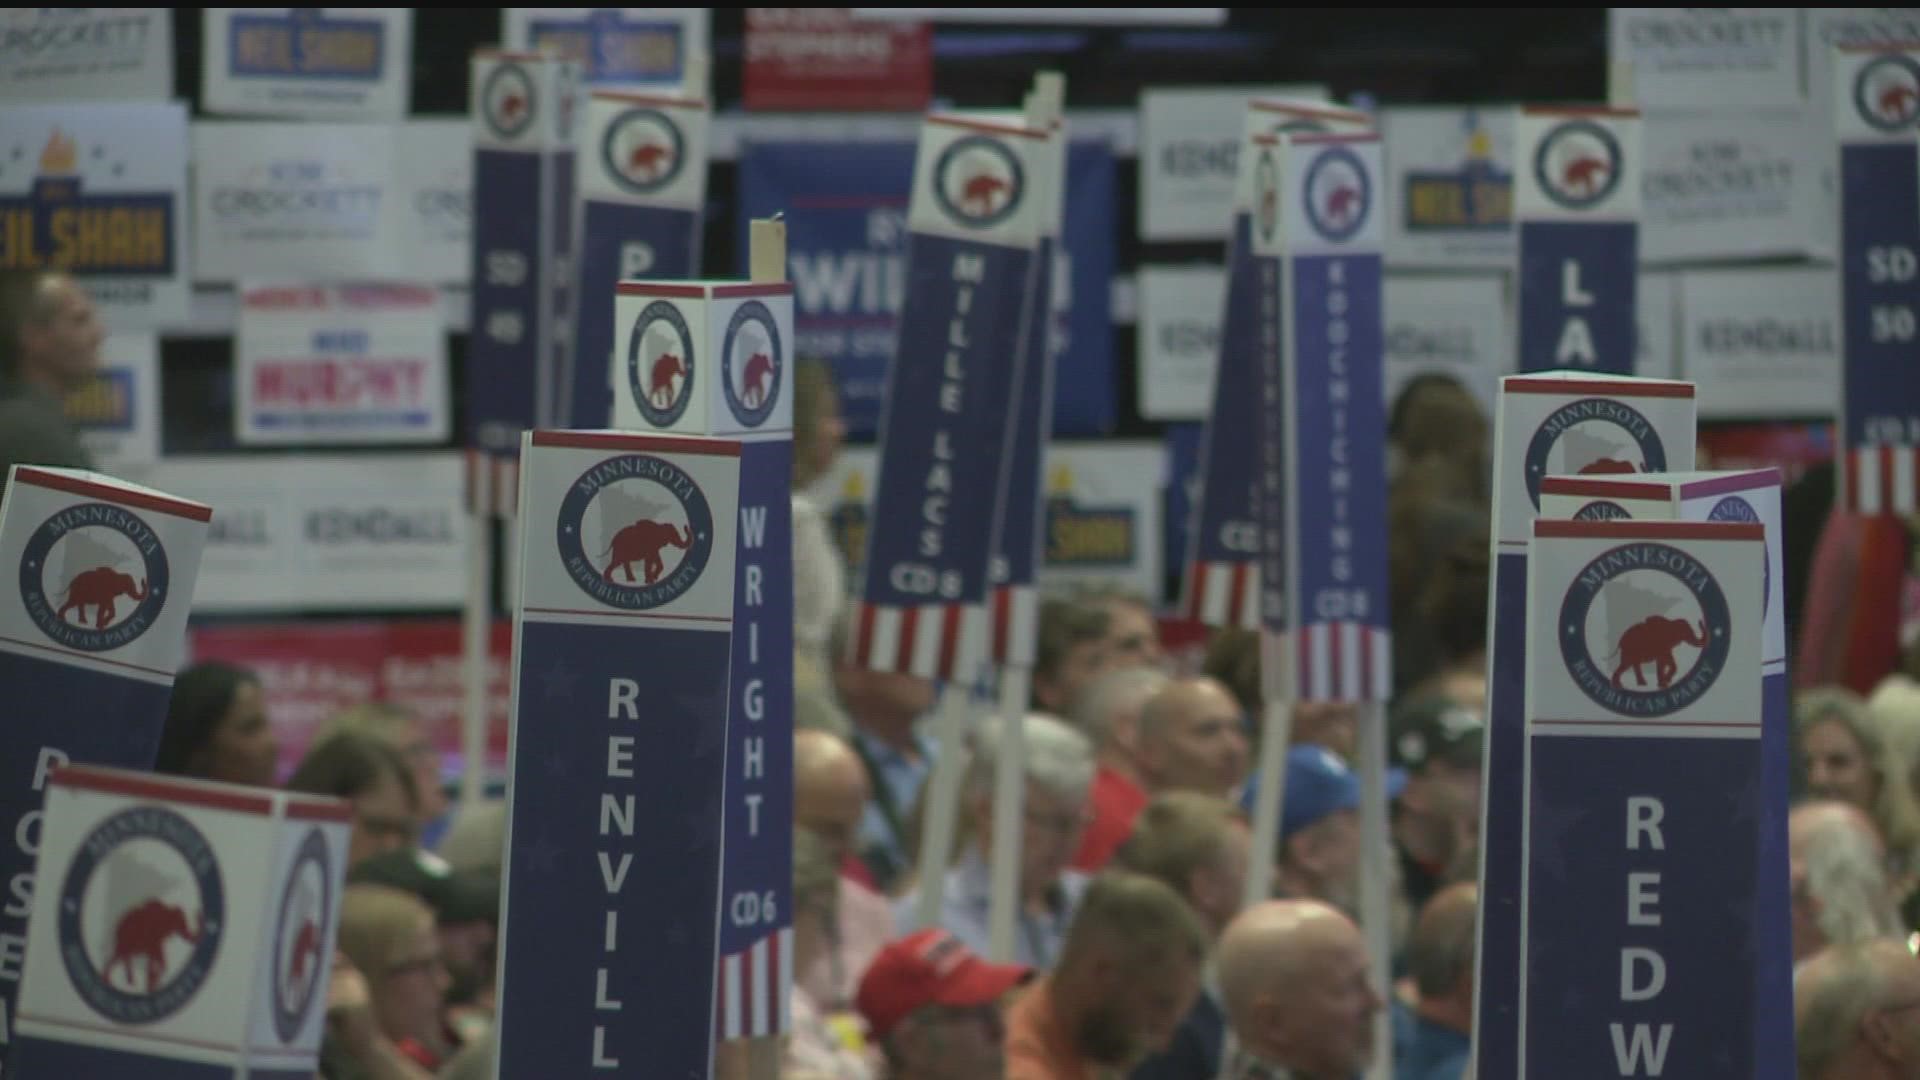 MN GOP seeks victory as convention opens in Rochester